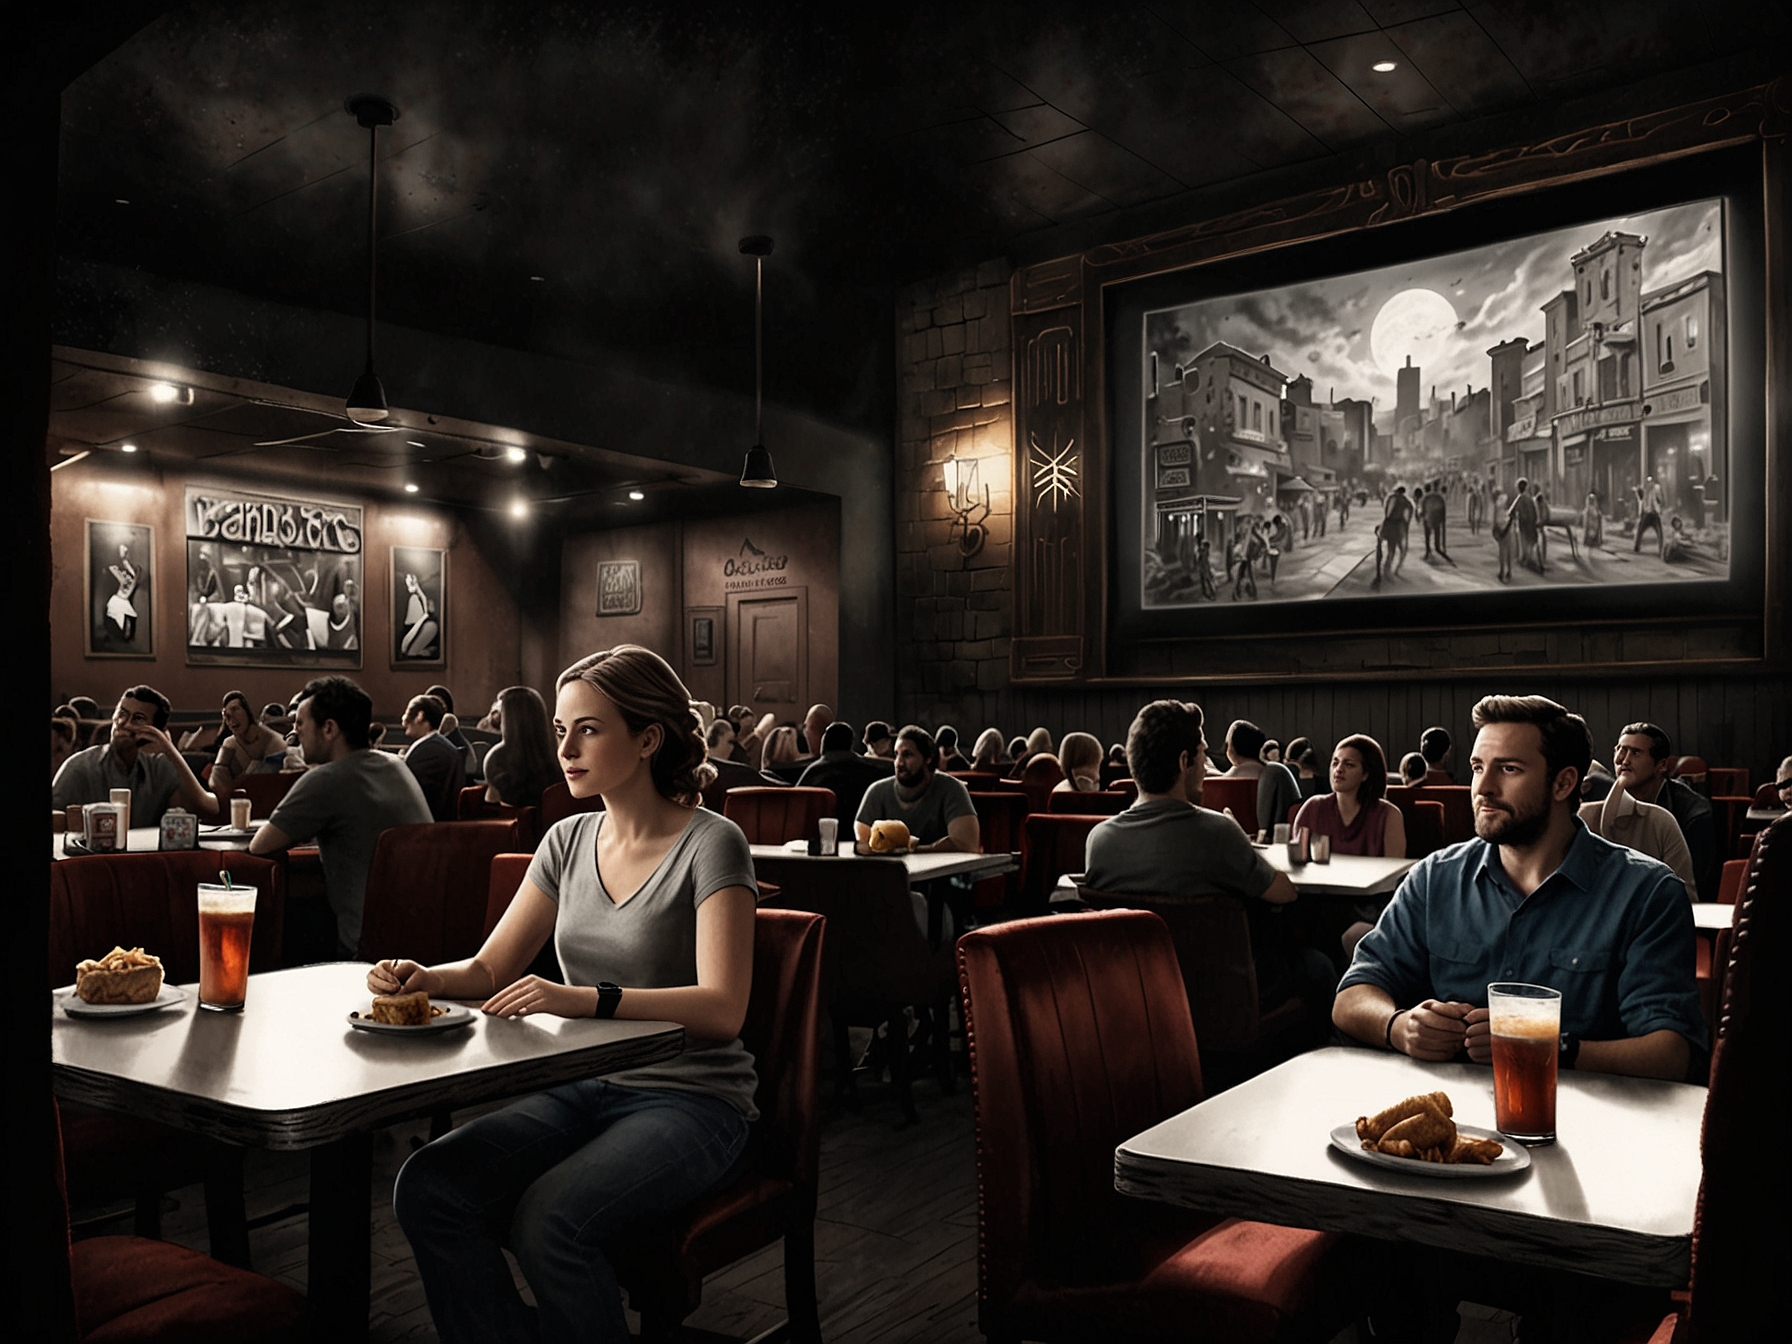 Inside Alamo Drafthouse, patrons enjoy a movie while dining, with high-quality picture and sound. The lively atmosphere reflects the theater's commitment to an immersive and distraction-free experience.